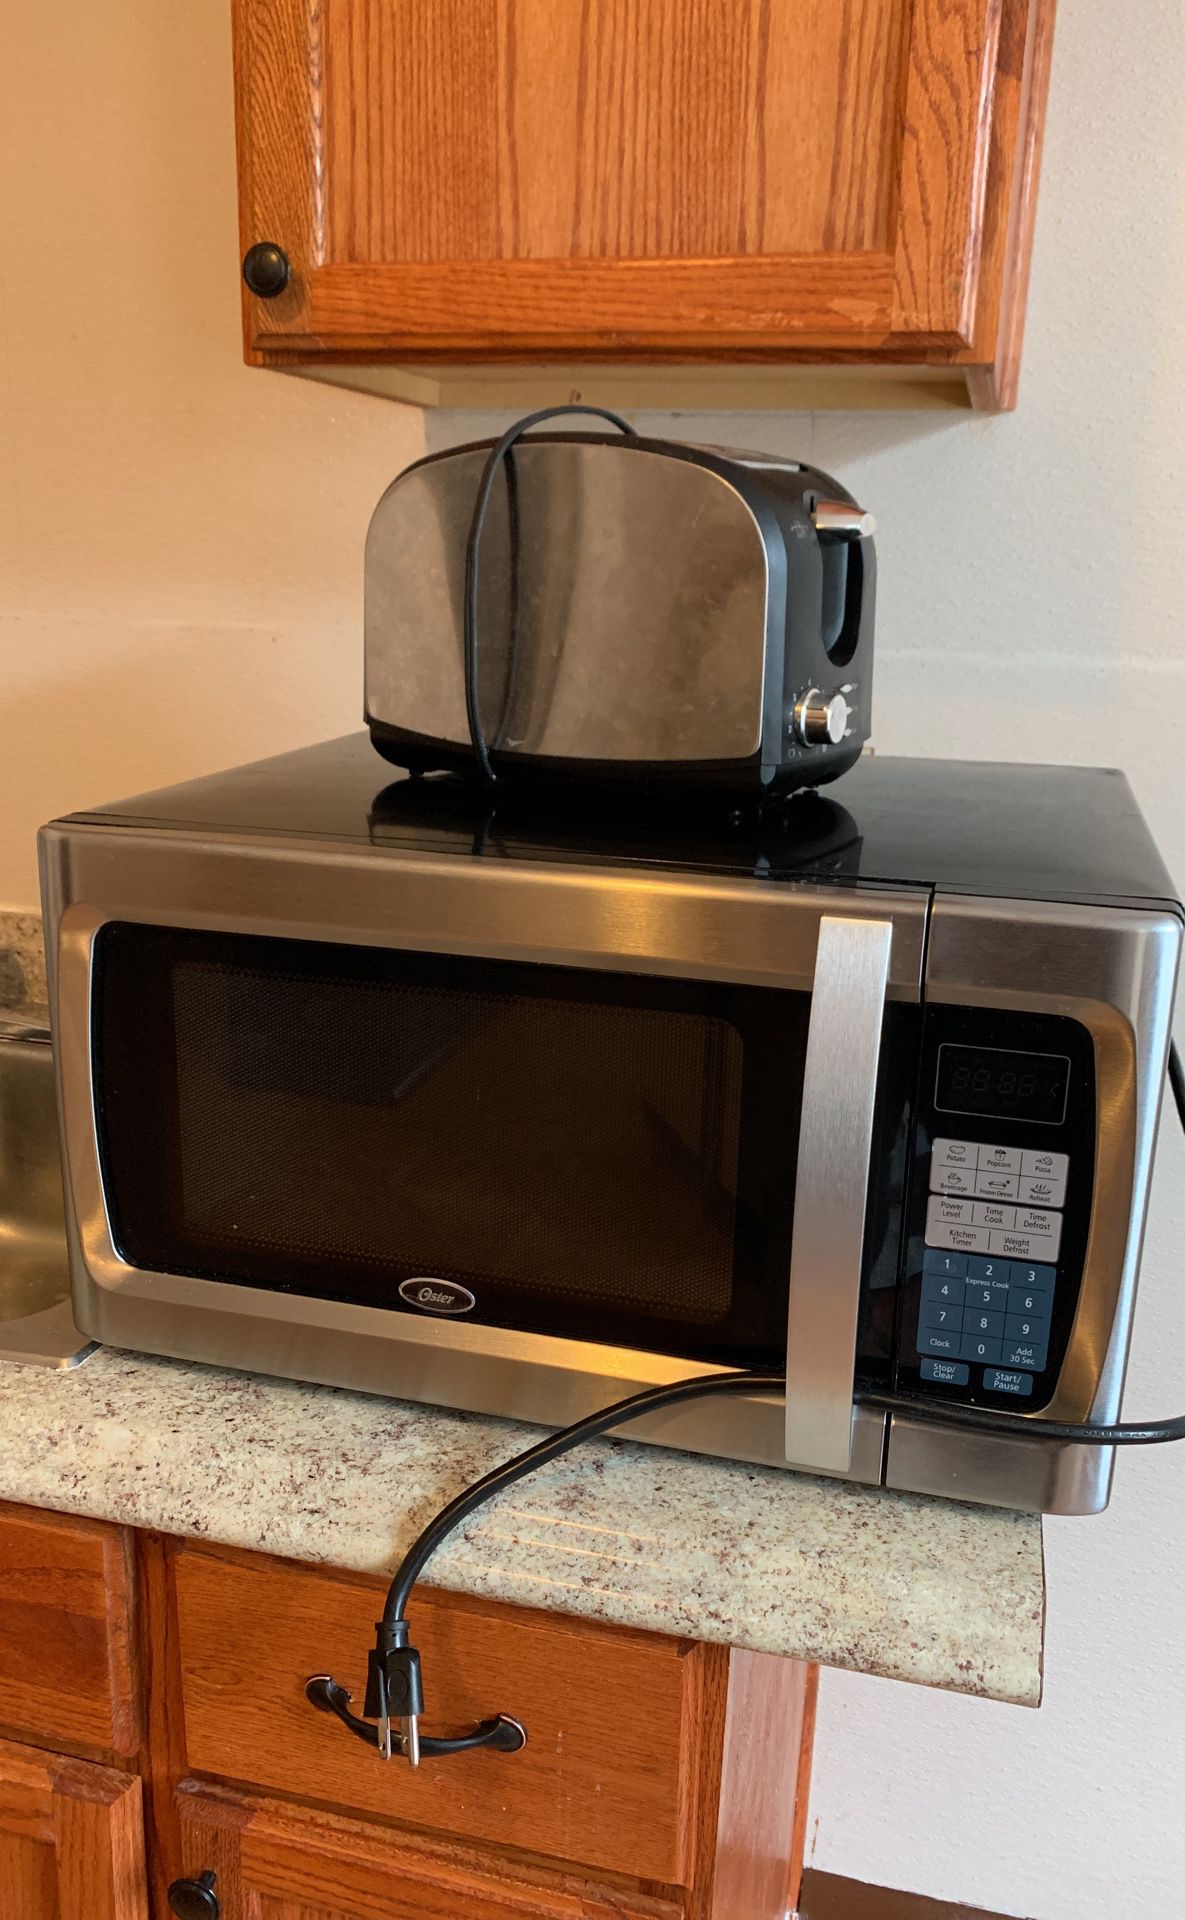 Large Microwave and toaster